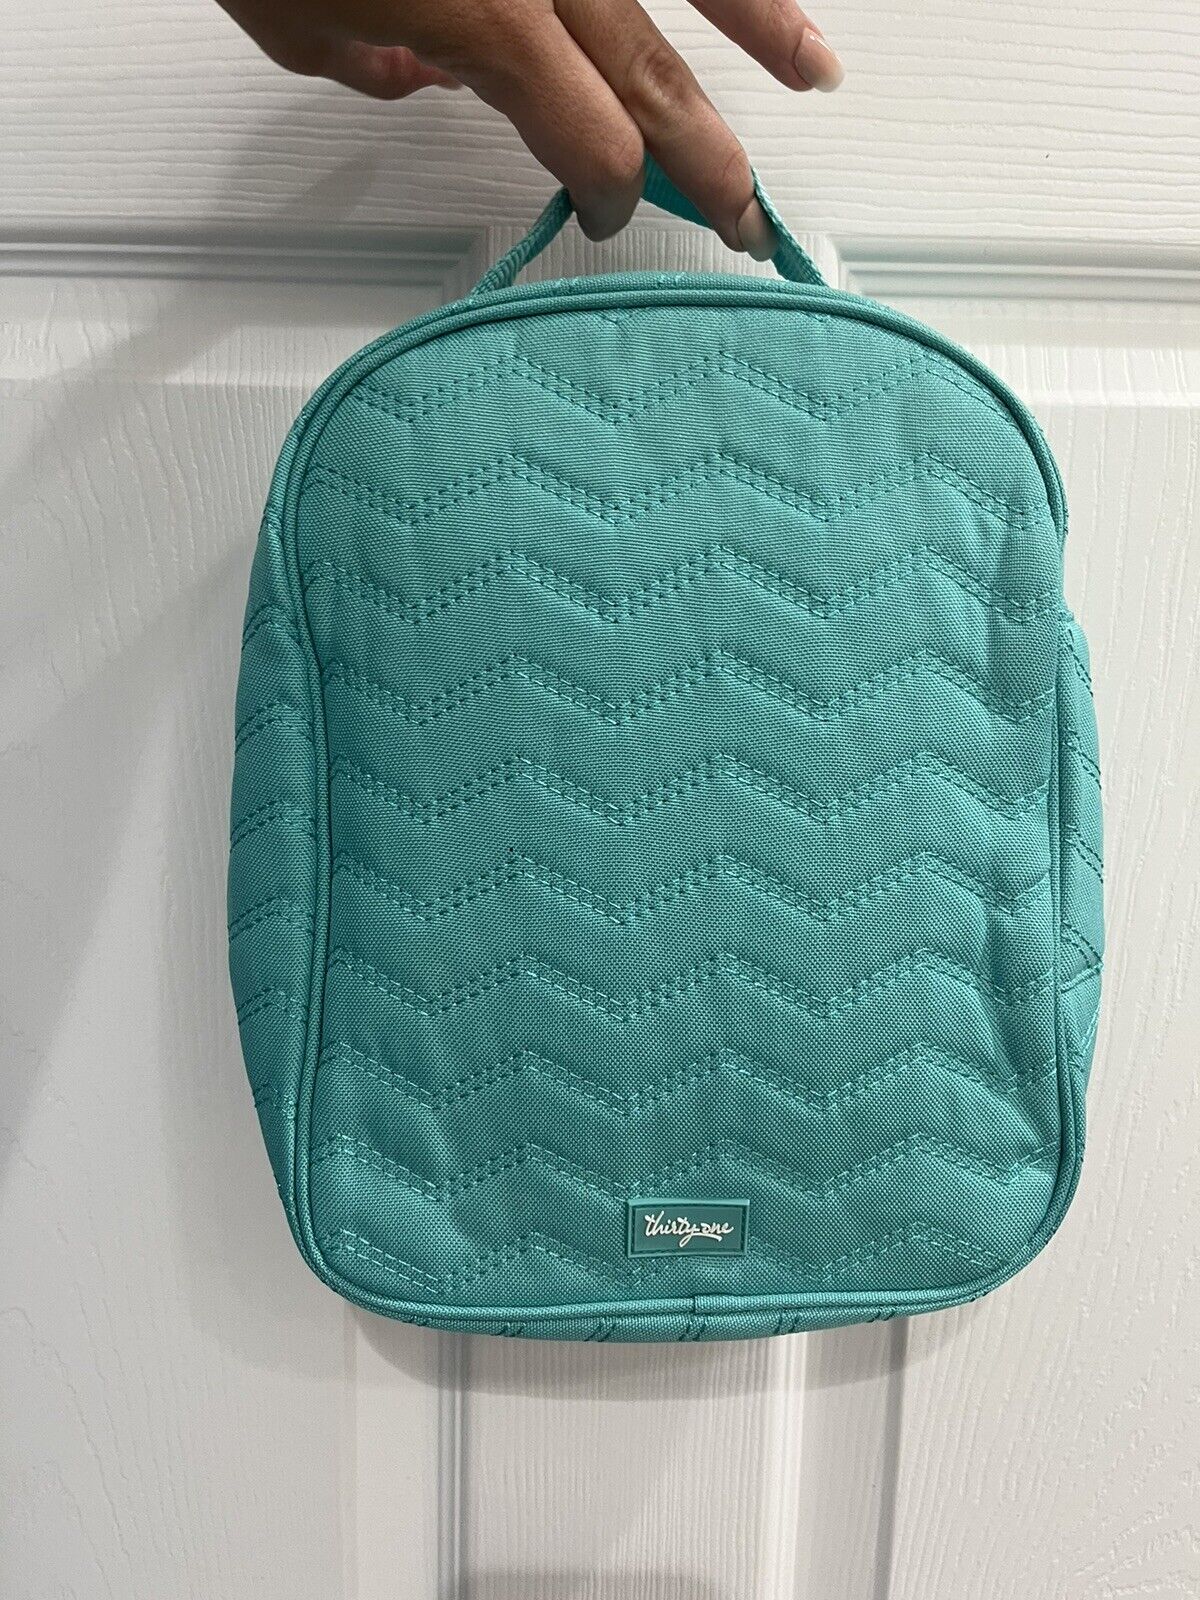 Thirty One 31 Chill-icious Thermal Insulated Lunch Bag Turquoise Quilted Chevron